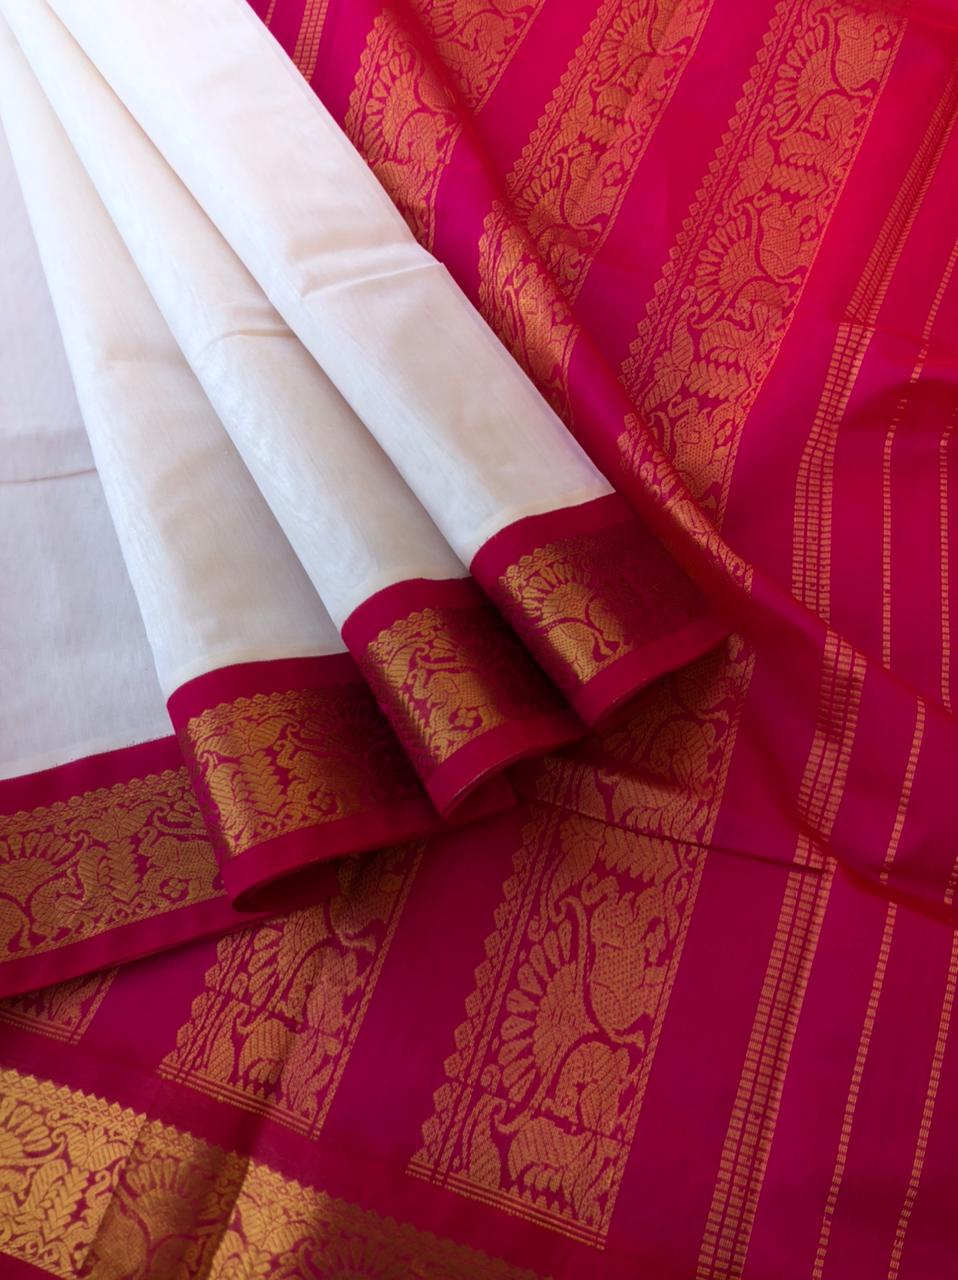 Korvai Silk Cotton - off white and pink